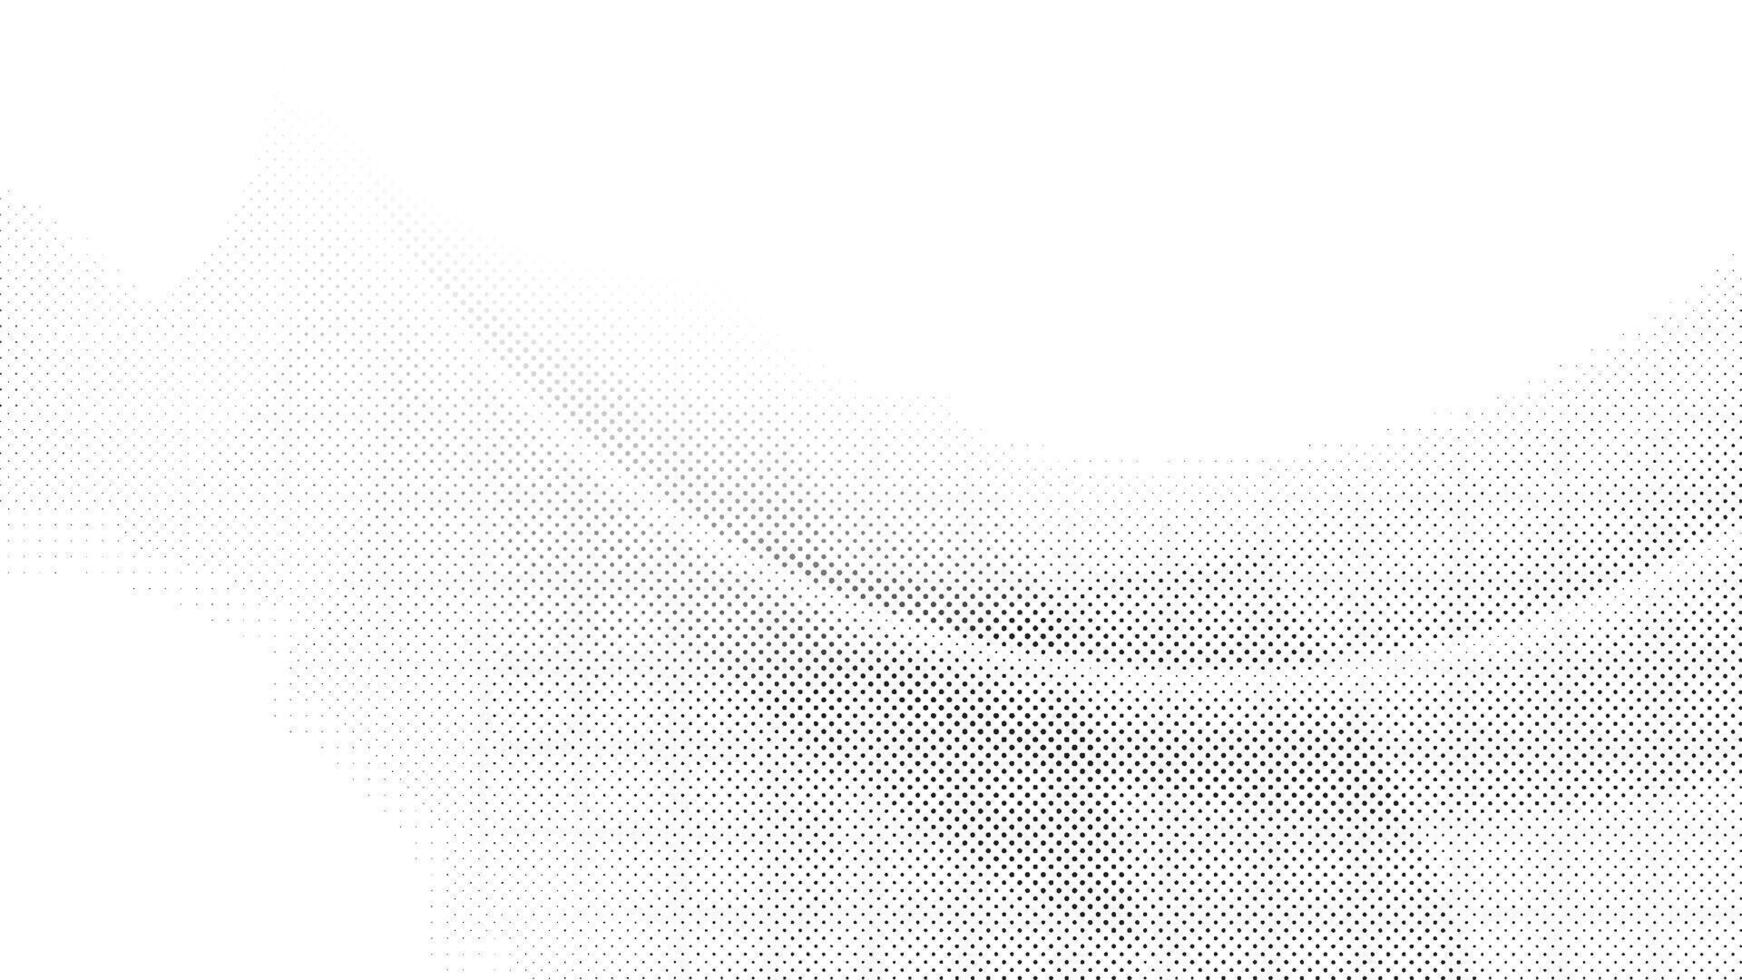 Abstract white and gray color background with halftone effect, dot pattern. illustration. vector